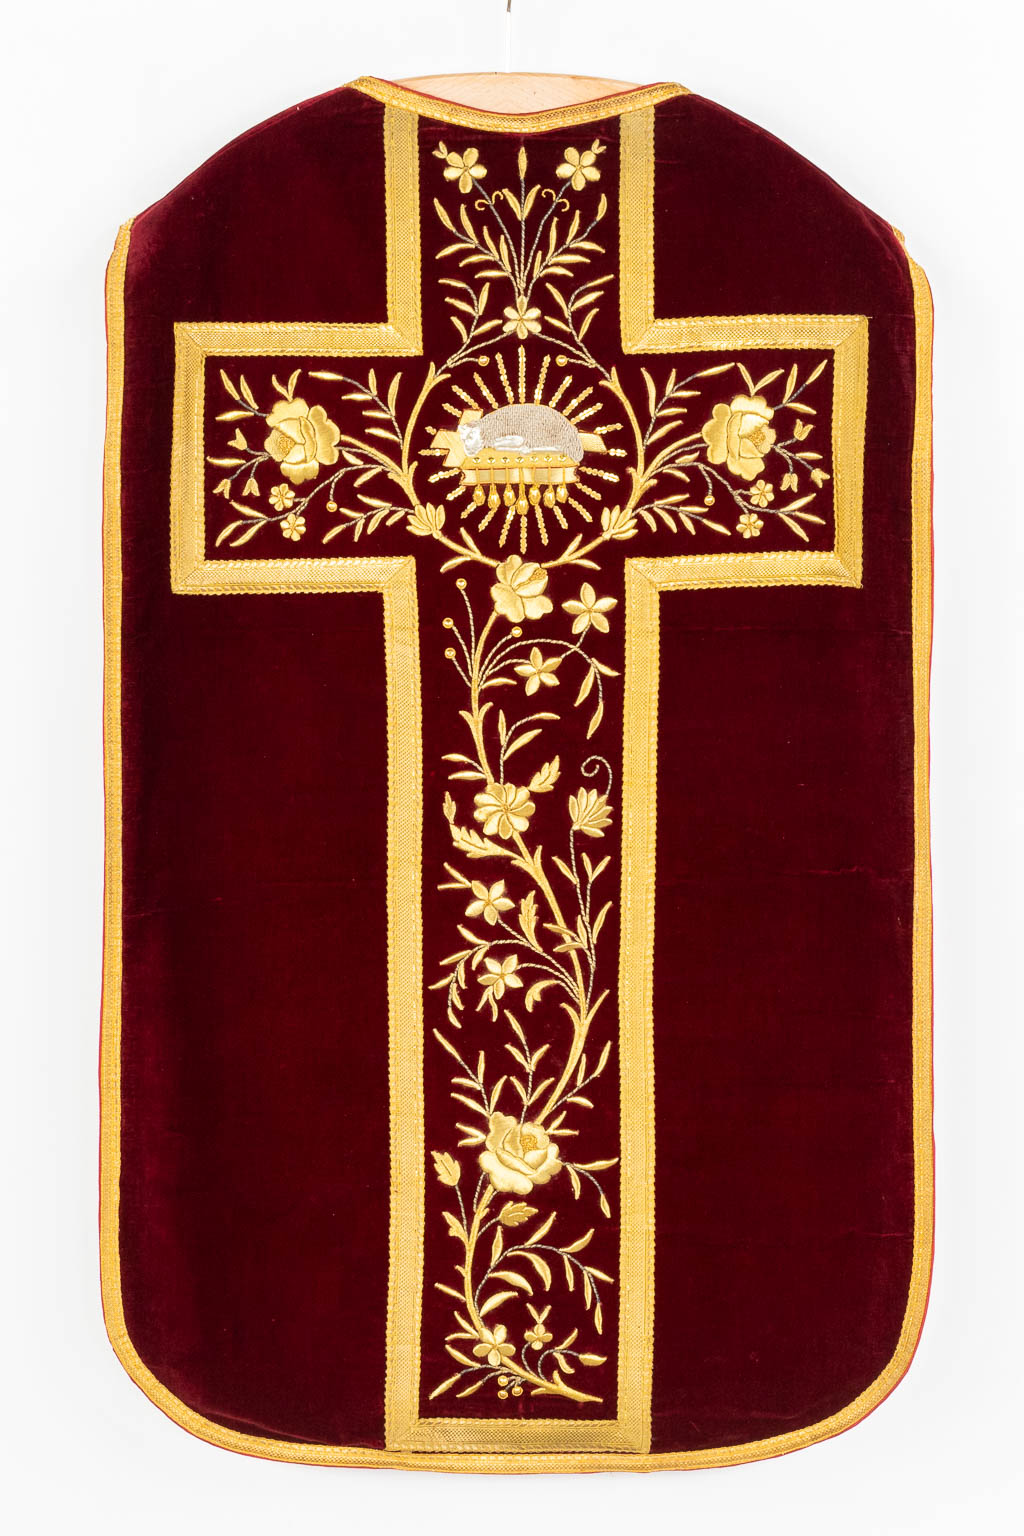 Two Roman Chasubles and stola, red fabric with thick gold thread embroideries.